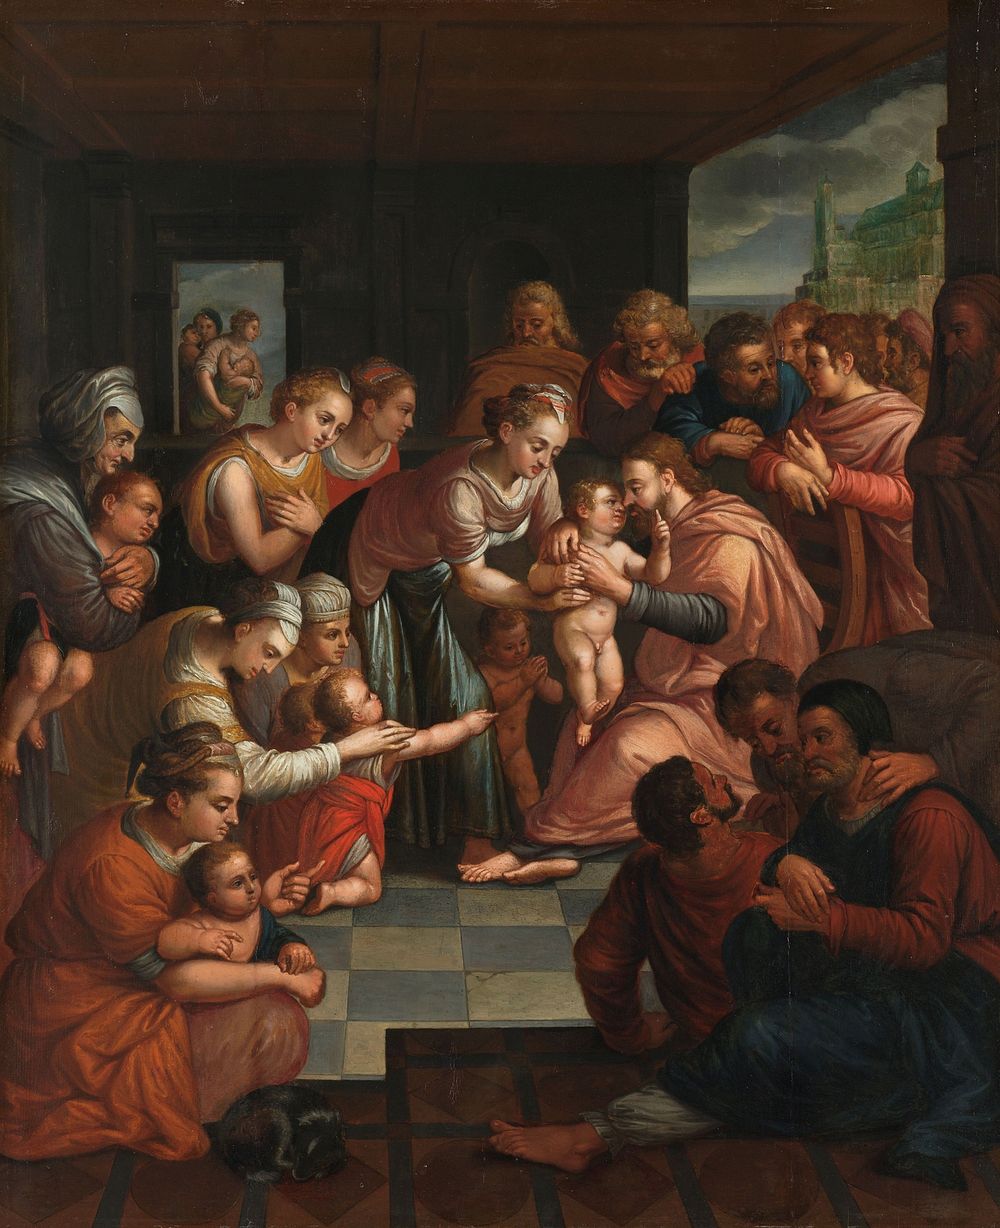 Christ Blessing the Children (c. 1570) by anonymous